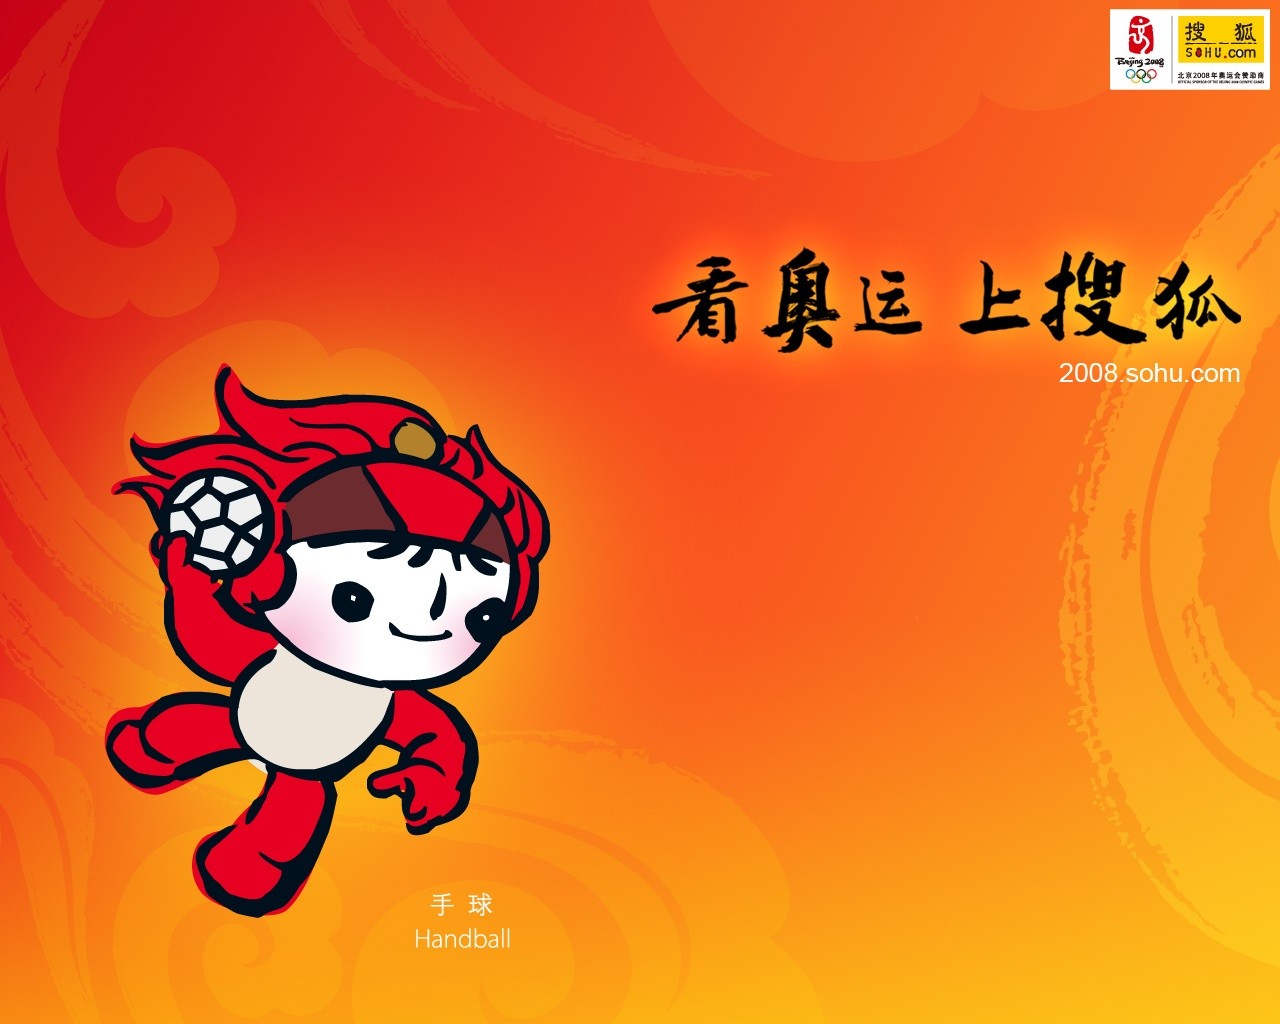 08 Olympic Games Fuwa Wallpapers #24 - 1280x1024